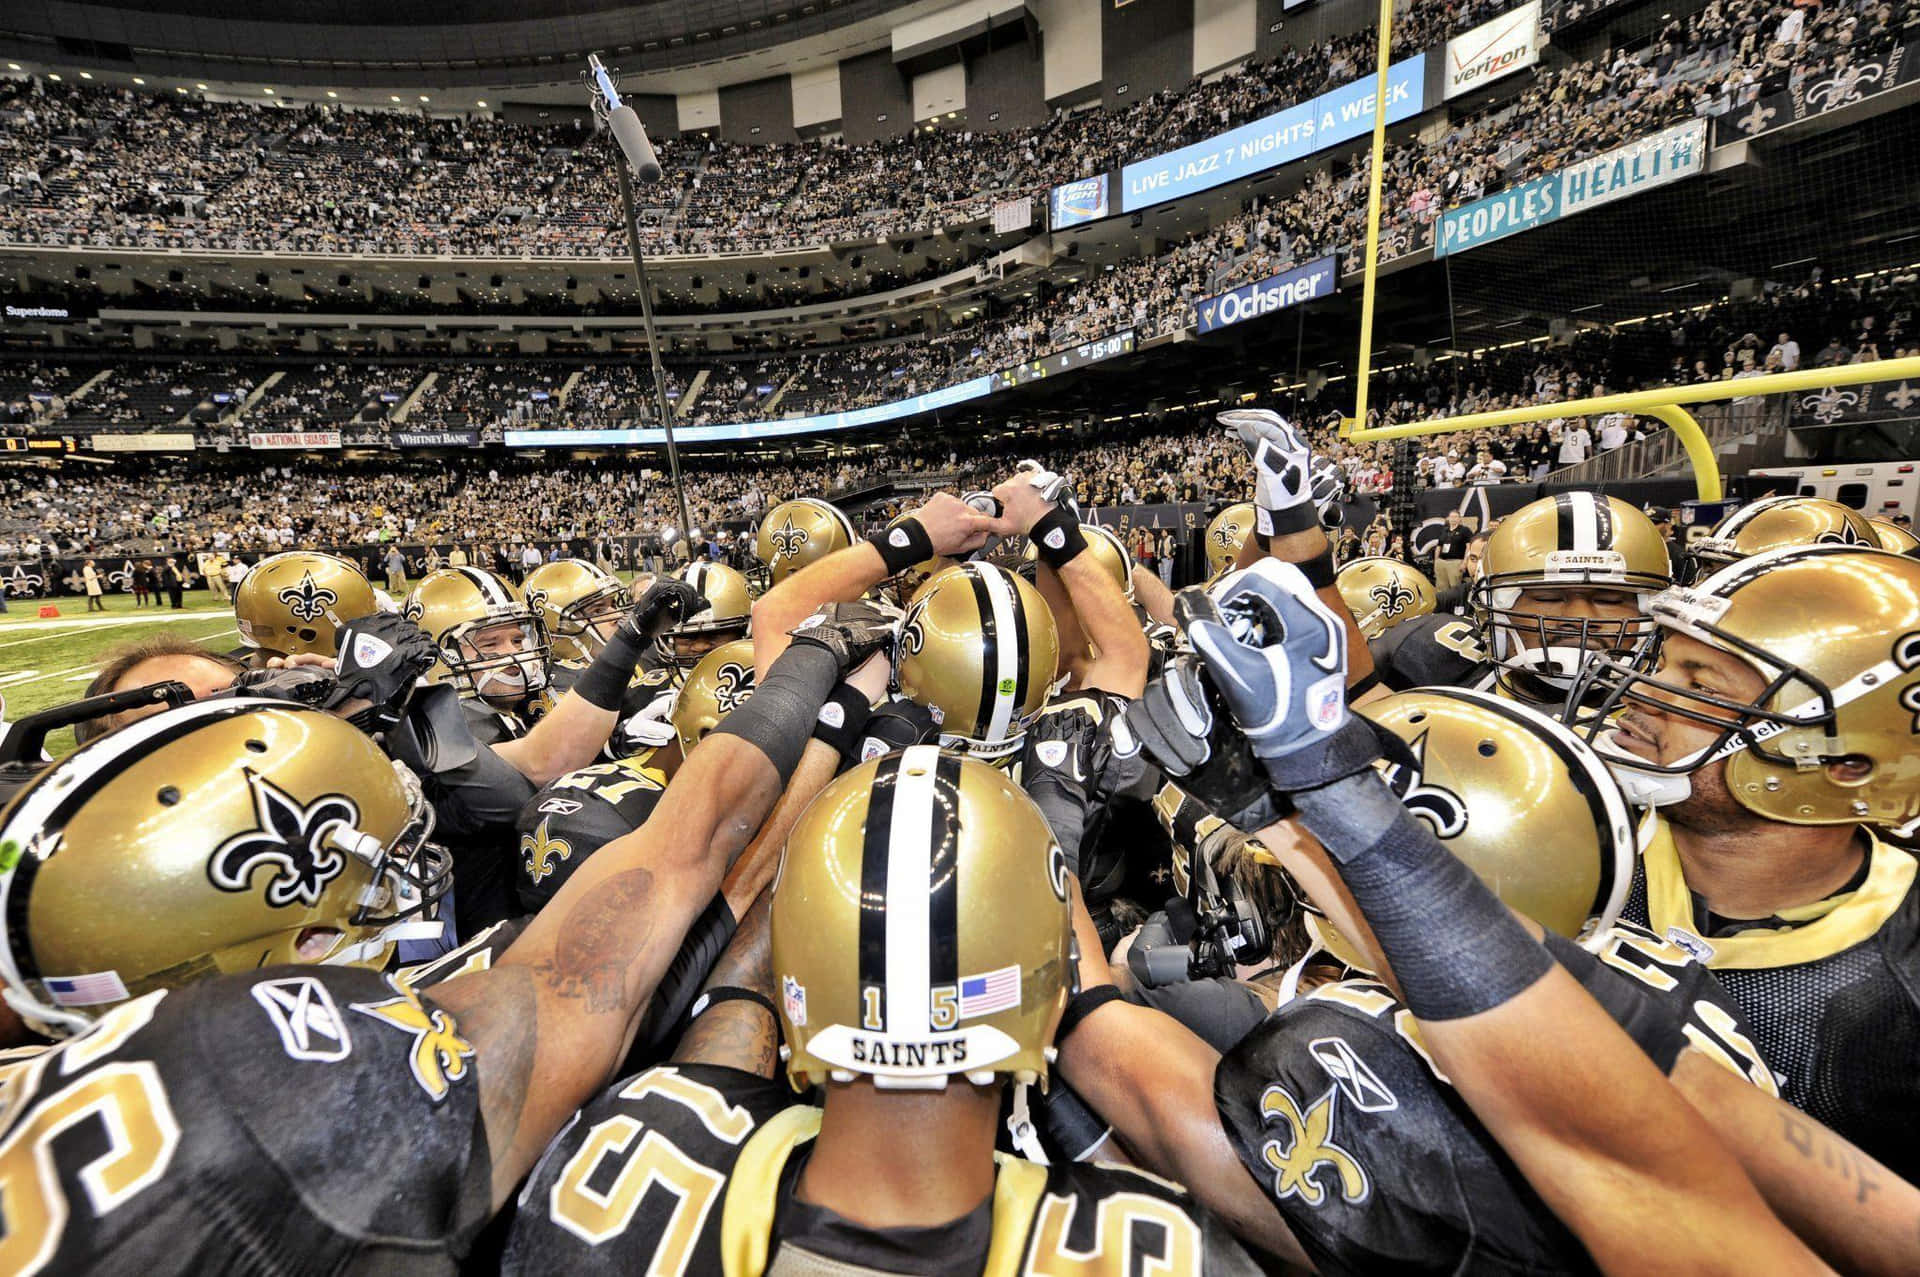 The New Orleans Saints Huddle In The Middle Of The Field